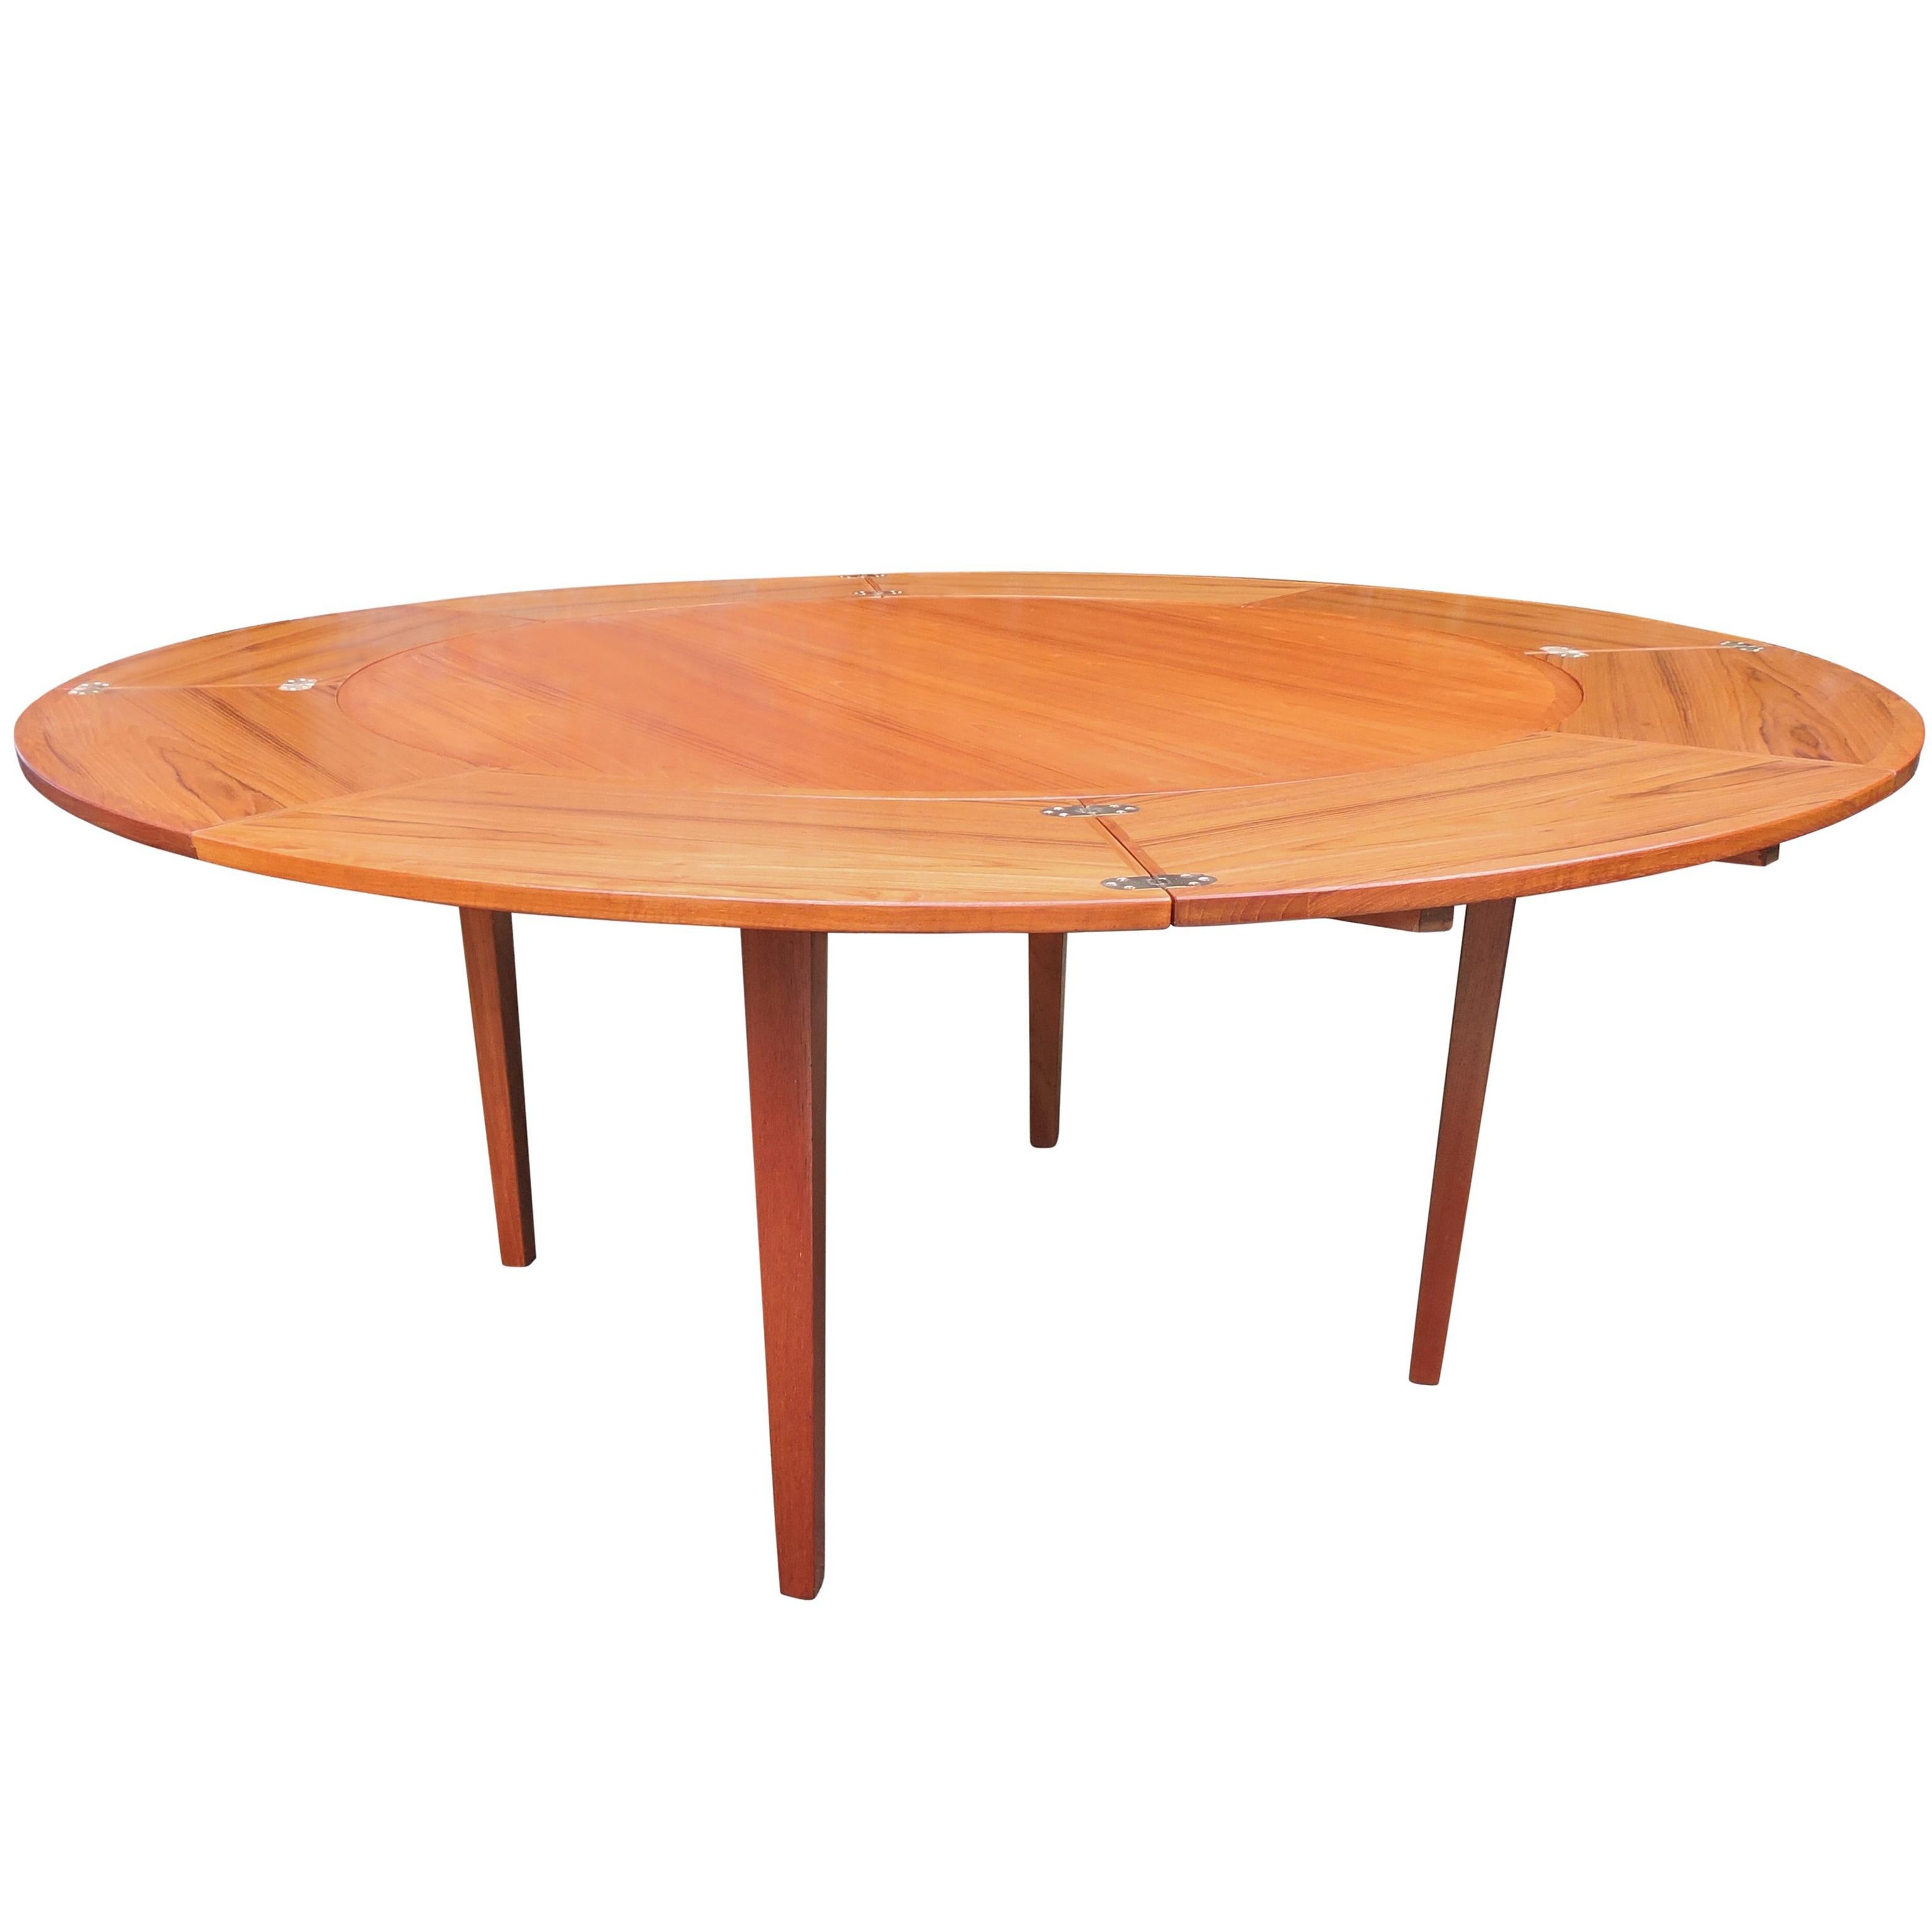 Midcentury Flip-Flap Teak Dining Table from Dyrlund, 1950s For Sale